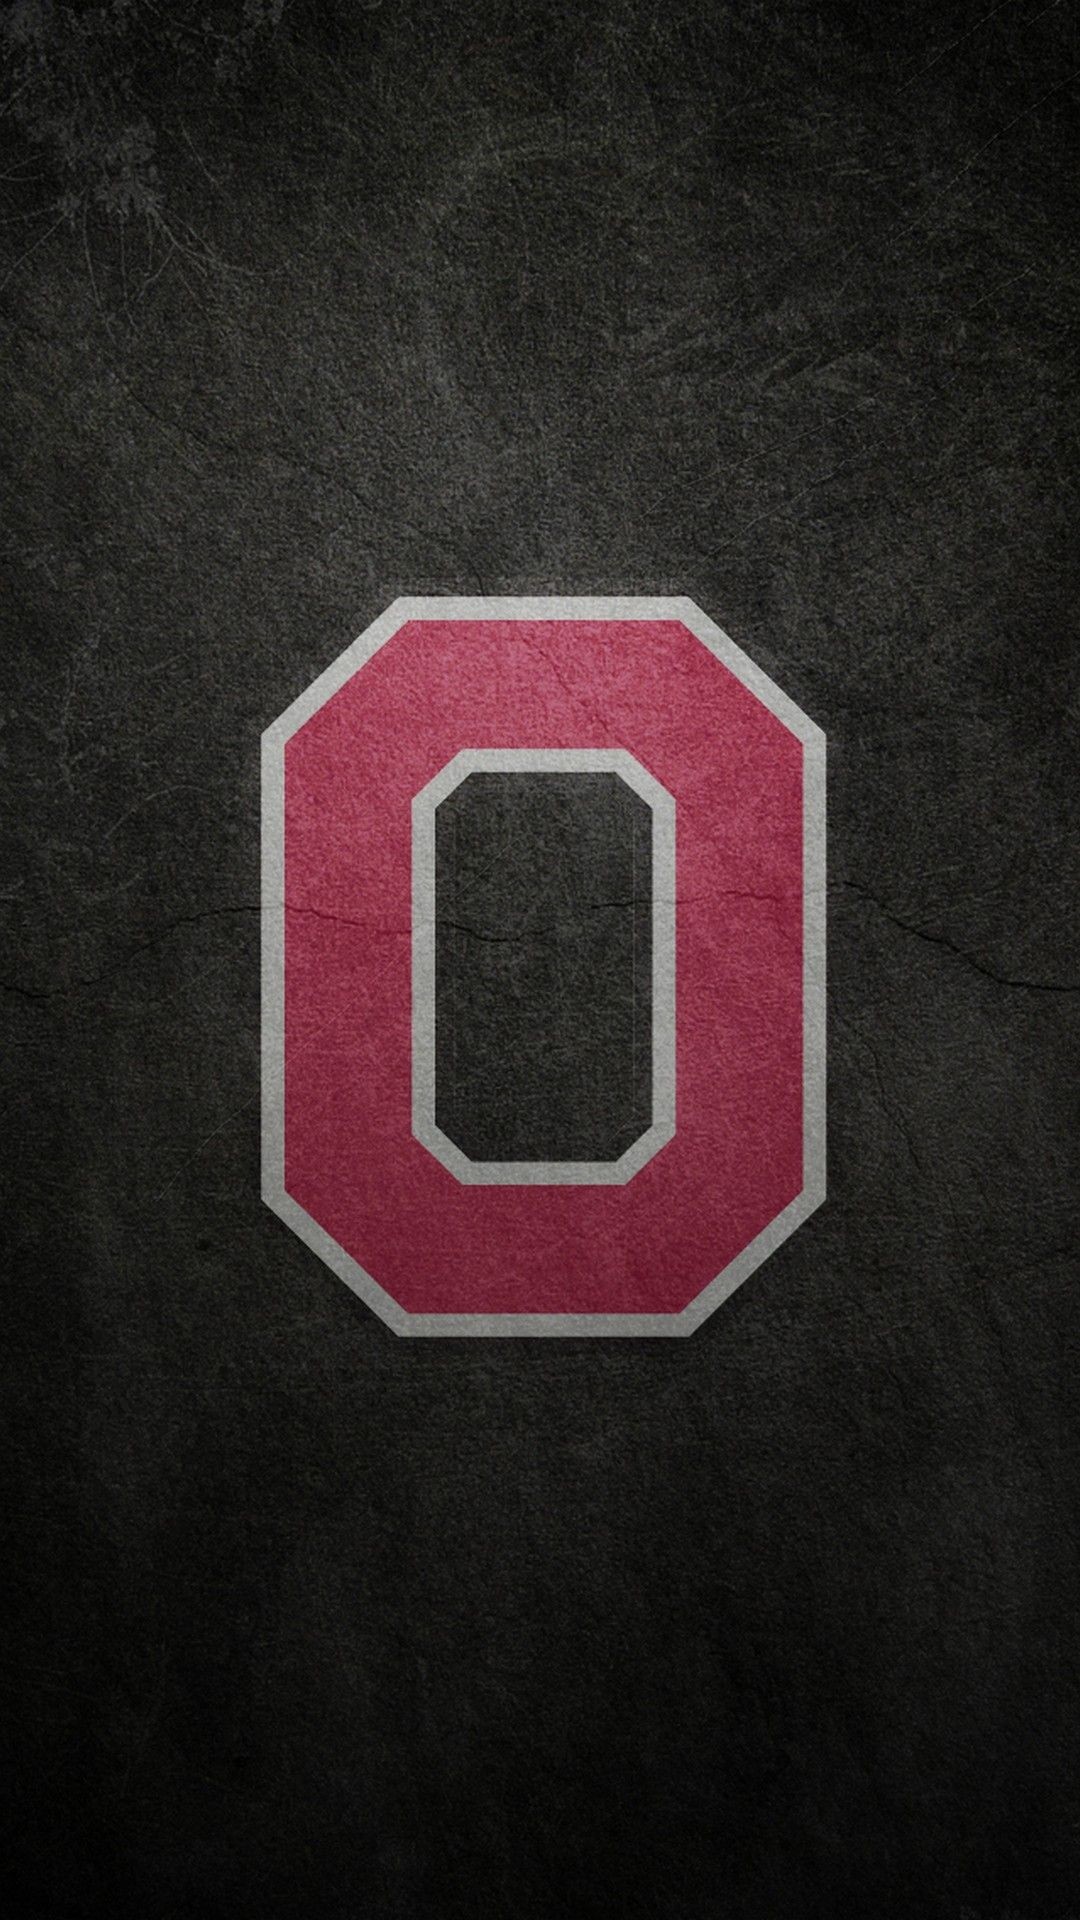 1080x1920 Ohio State Android Wallpaper - Best iPhone Wallpaper